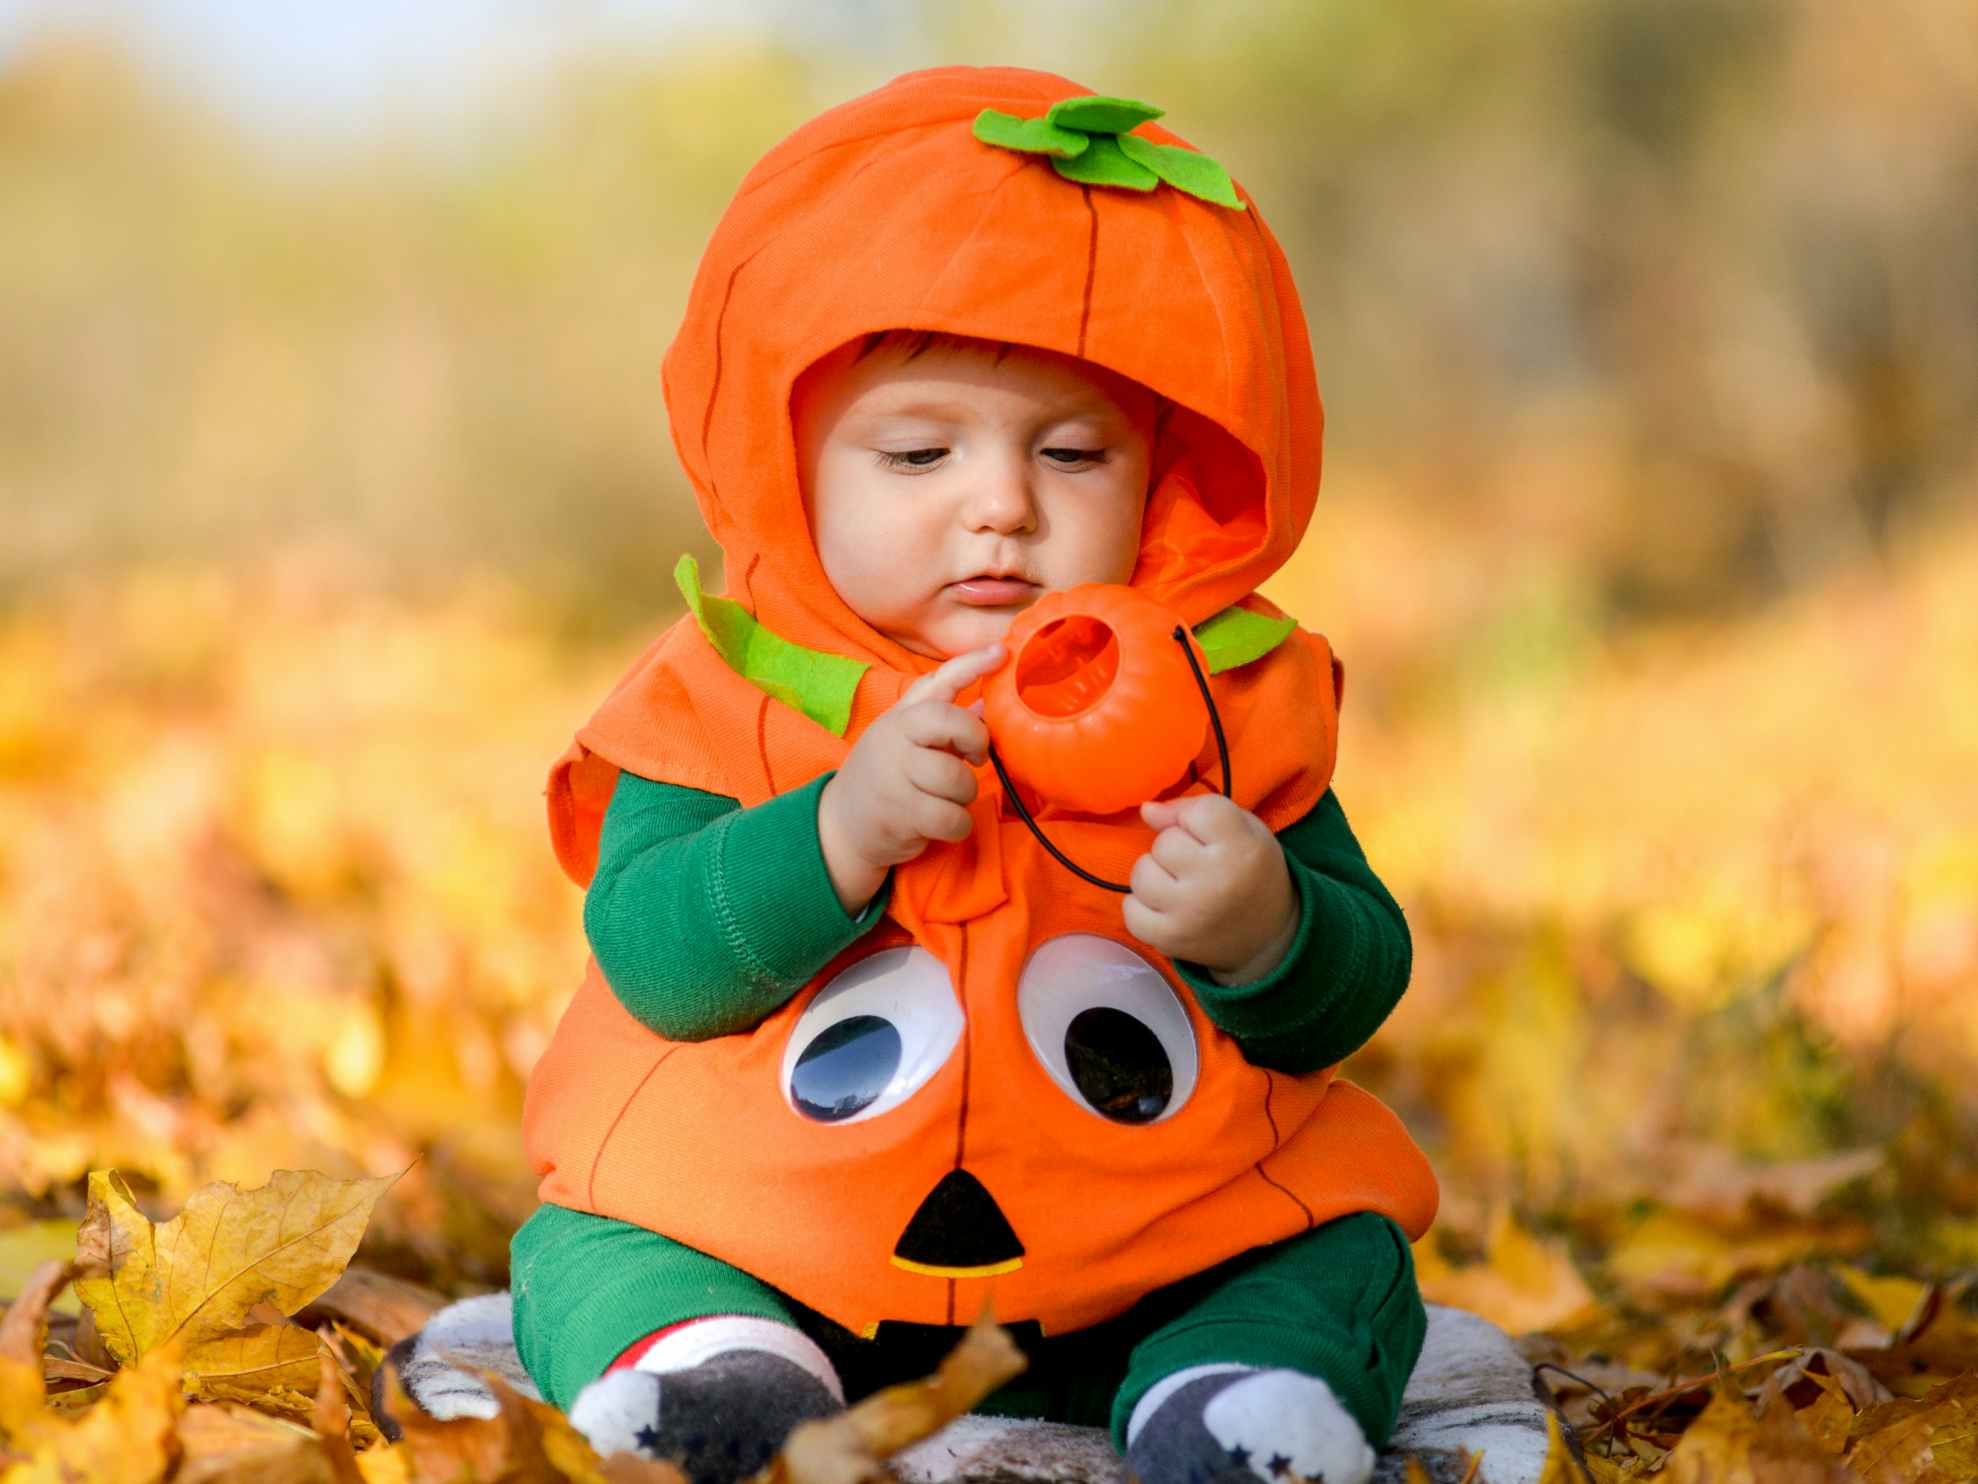 A baby dressed as a pumpkin sitting in some fallen leaves.